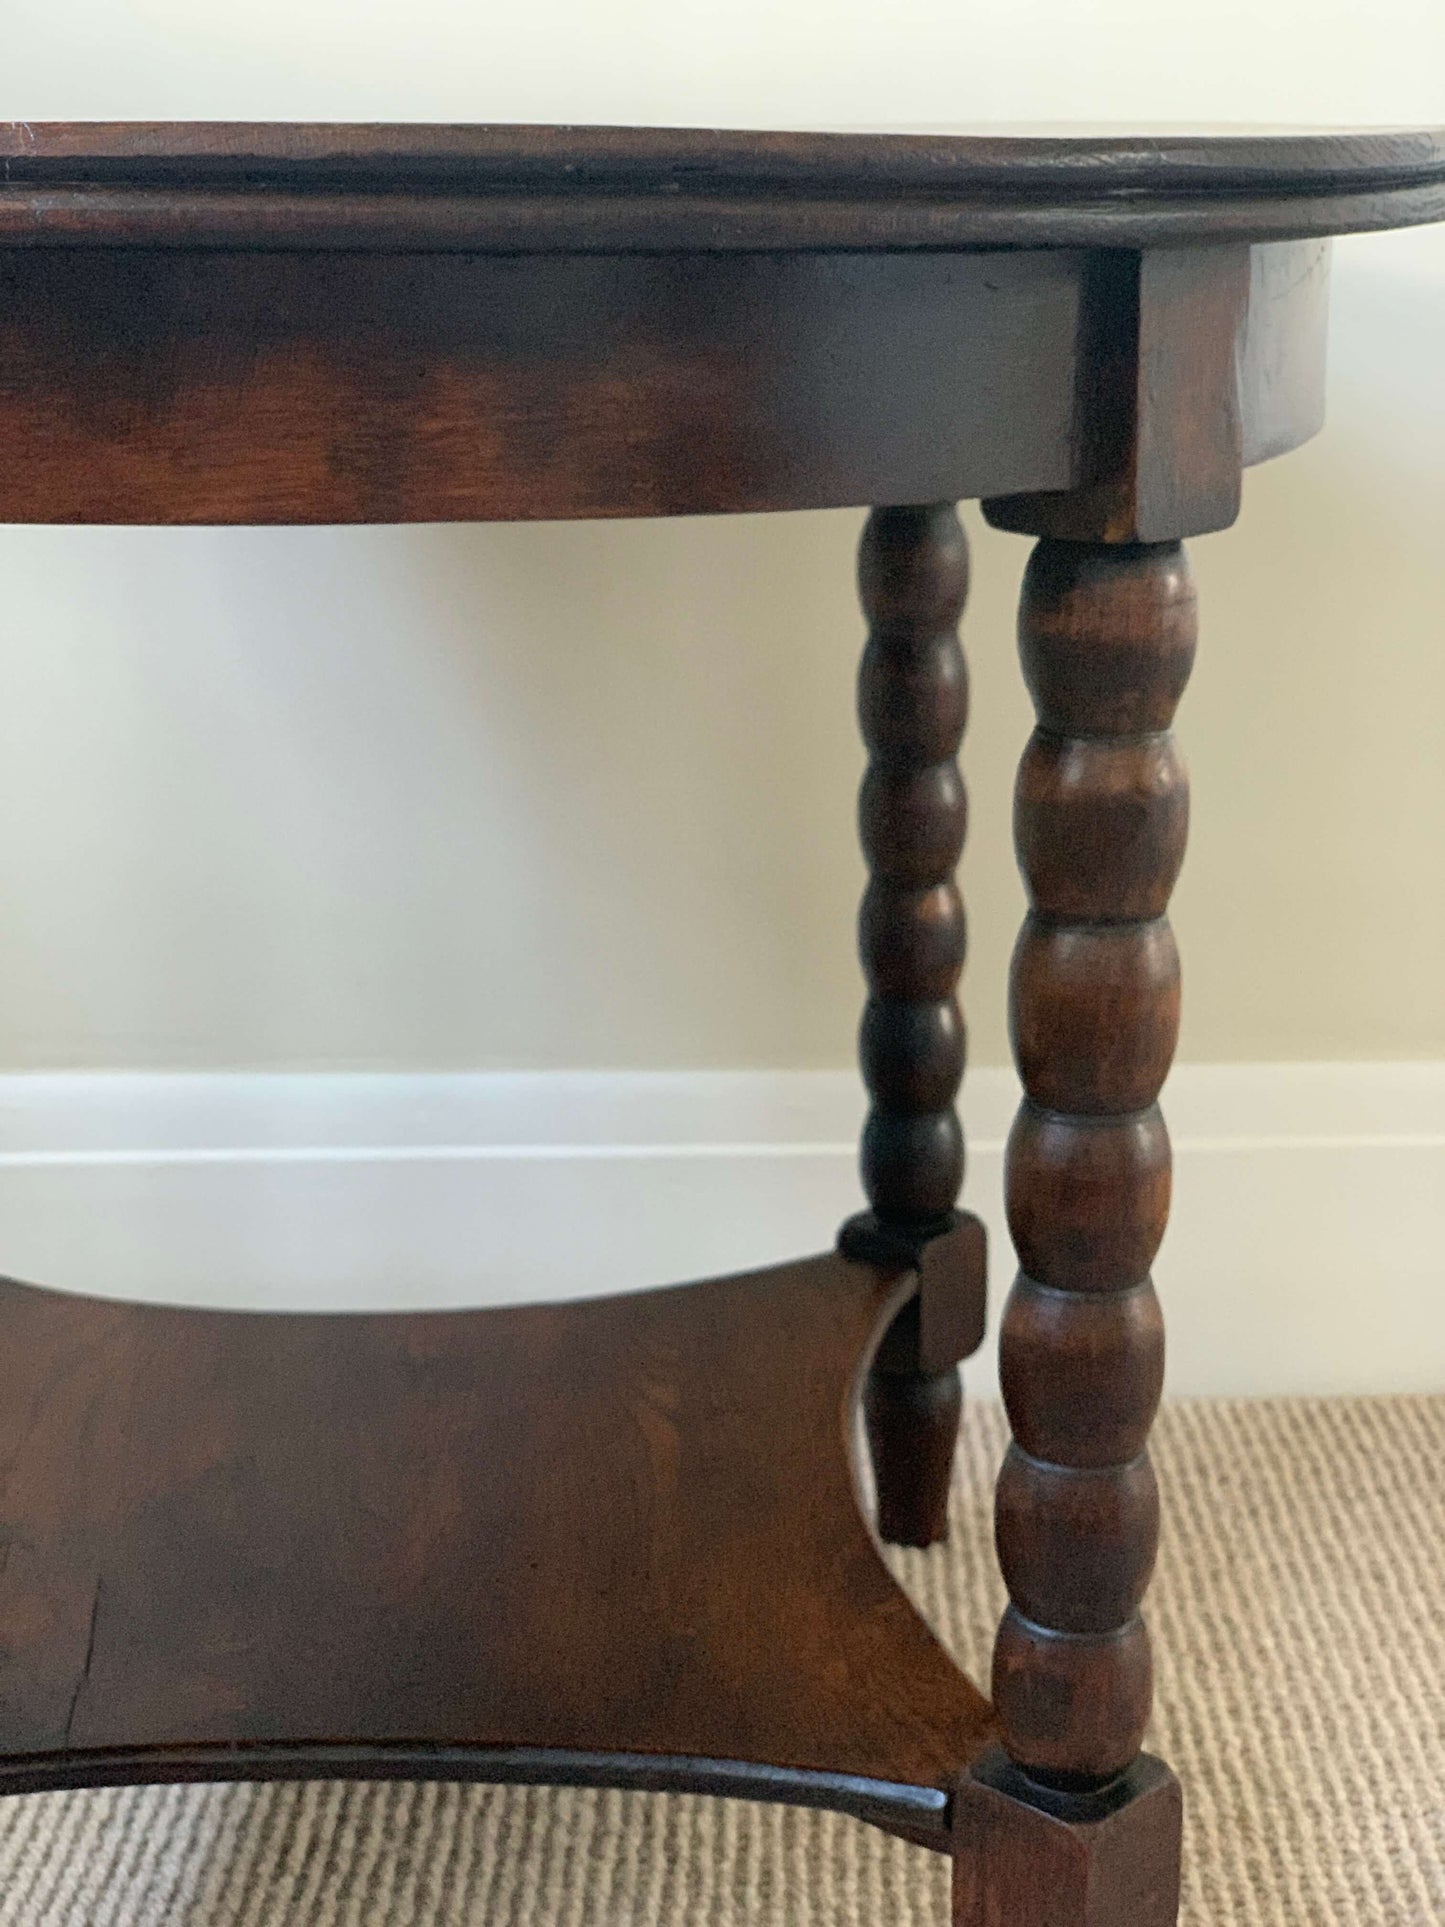 French antique circular two-tiered bobbin table